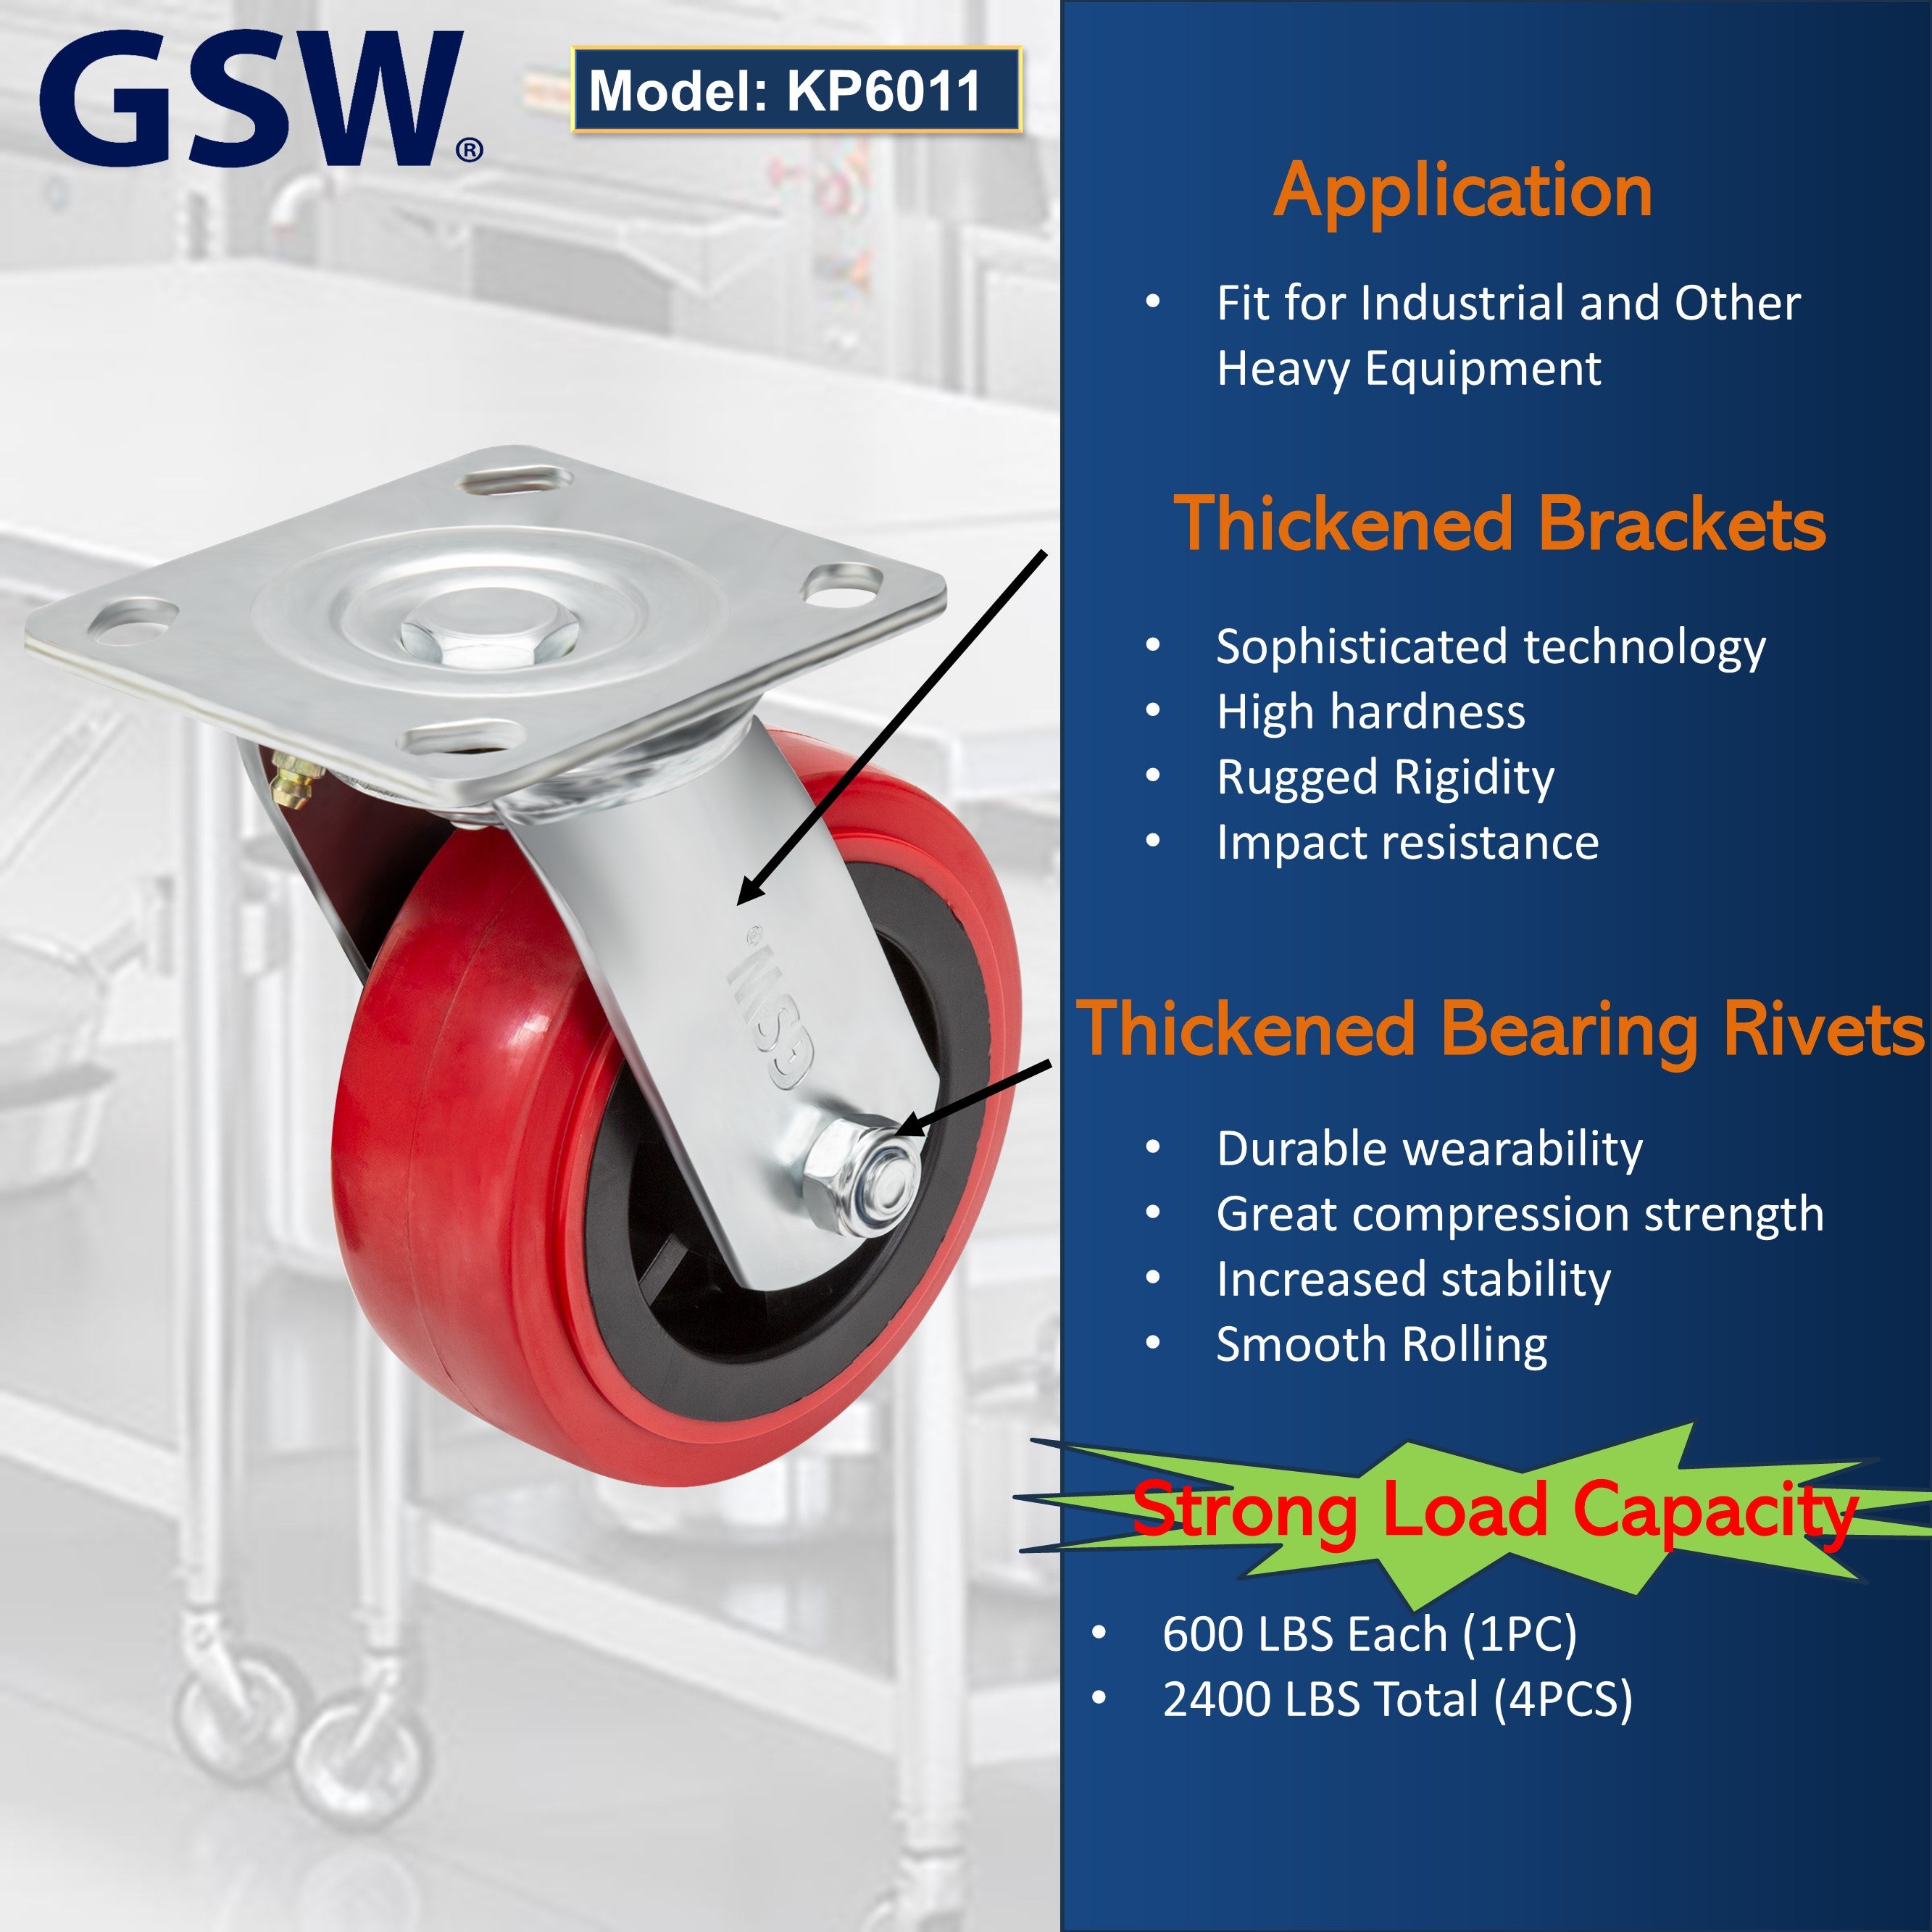 GSW 5" Industrial Casters - Heavy Duty Casters, Set of 4 Plate Casters with Loading Capacity of 2400 Lbs, Use for Heavy Equipment, Carts, and Workbench (4 Swivels)